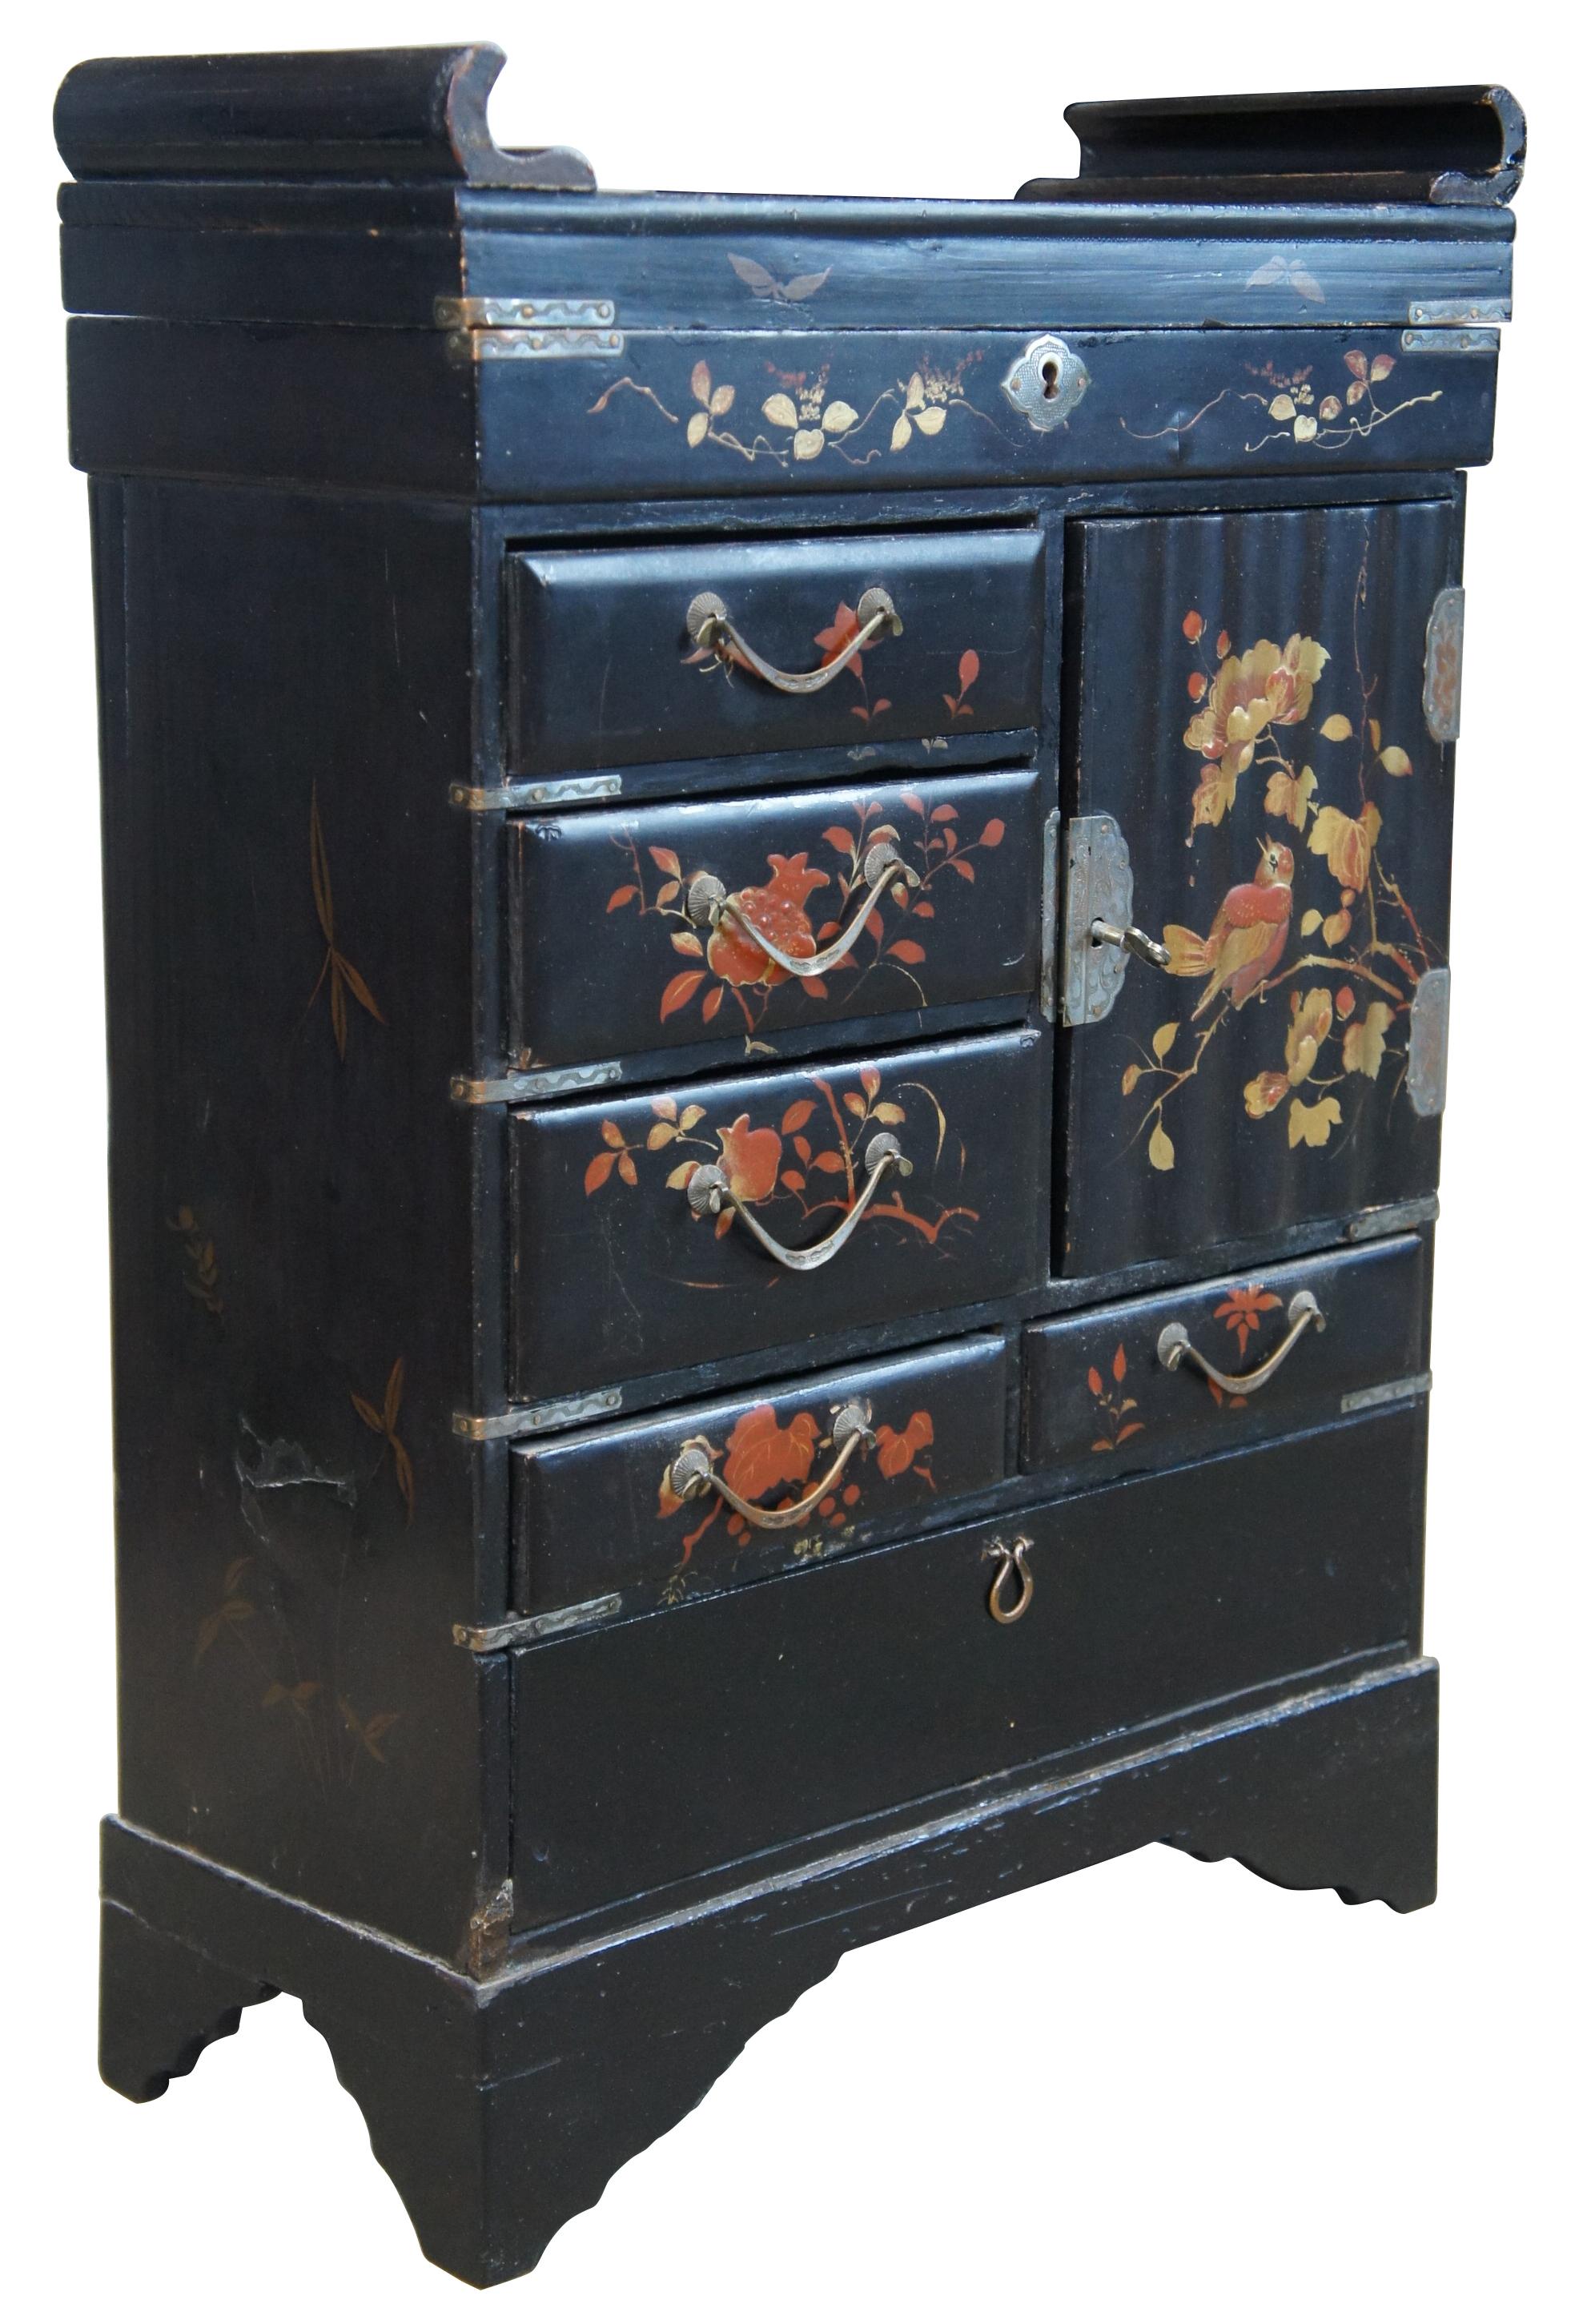 Antique Japanese Meiji Period vanity box in the form of a miniature armoire / chifferobe or Tallboy dresser, circa late 19th century. A rectangular form made from wood with black lacquer finish. Hand painted in red and gold featuring a foliate and